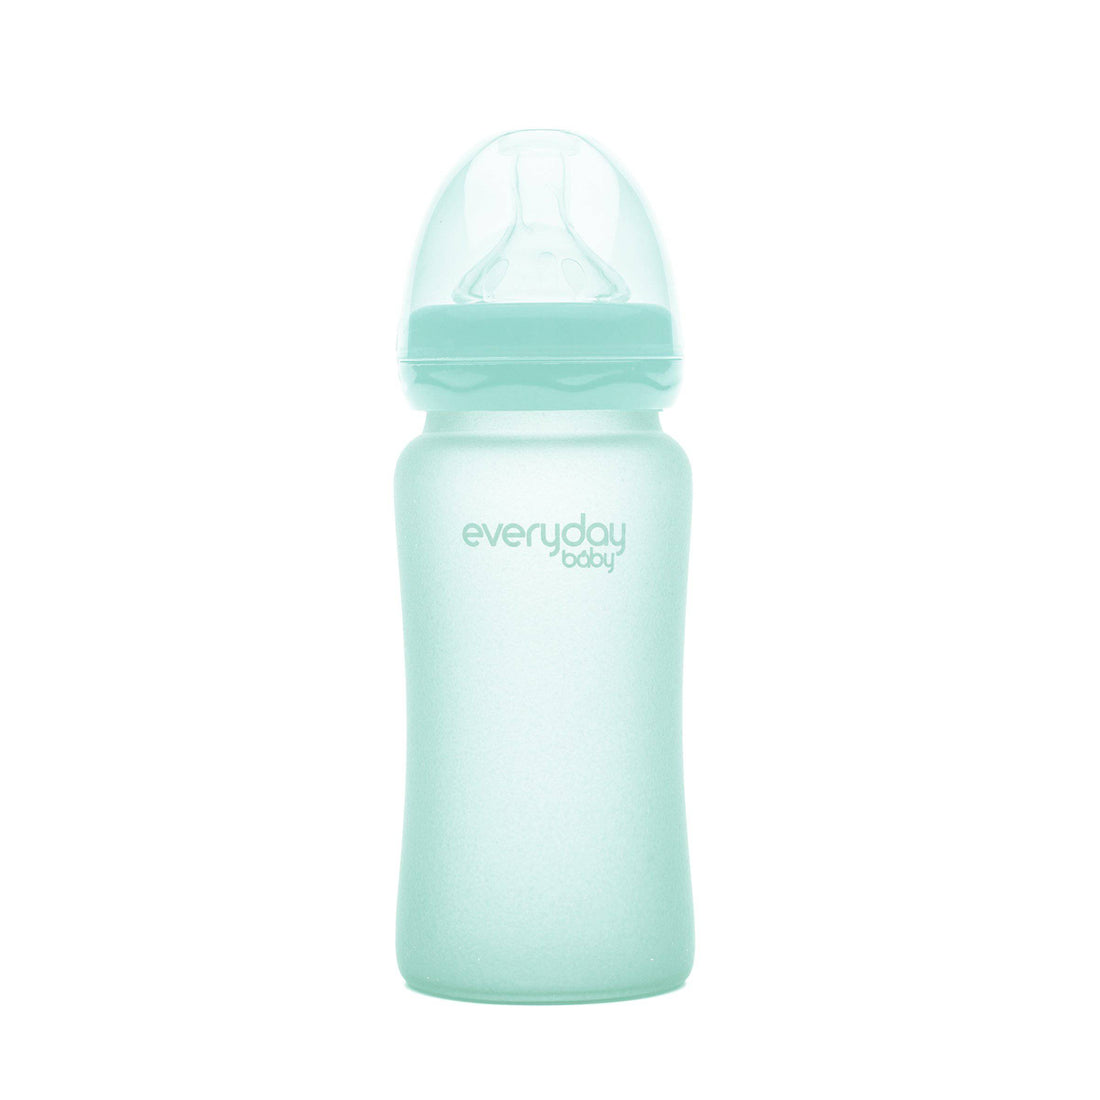 Glass Baby Bottle 240 ml Mint Green - Everyday Baby